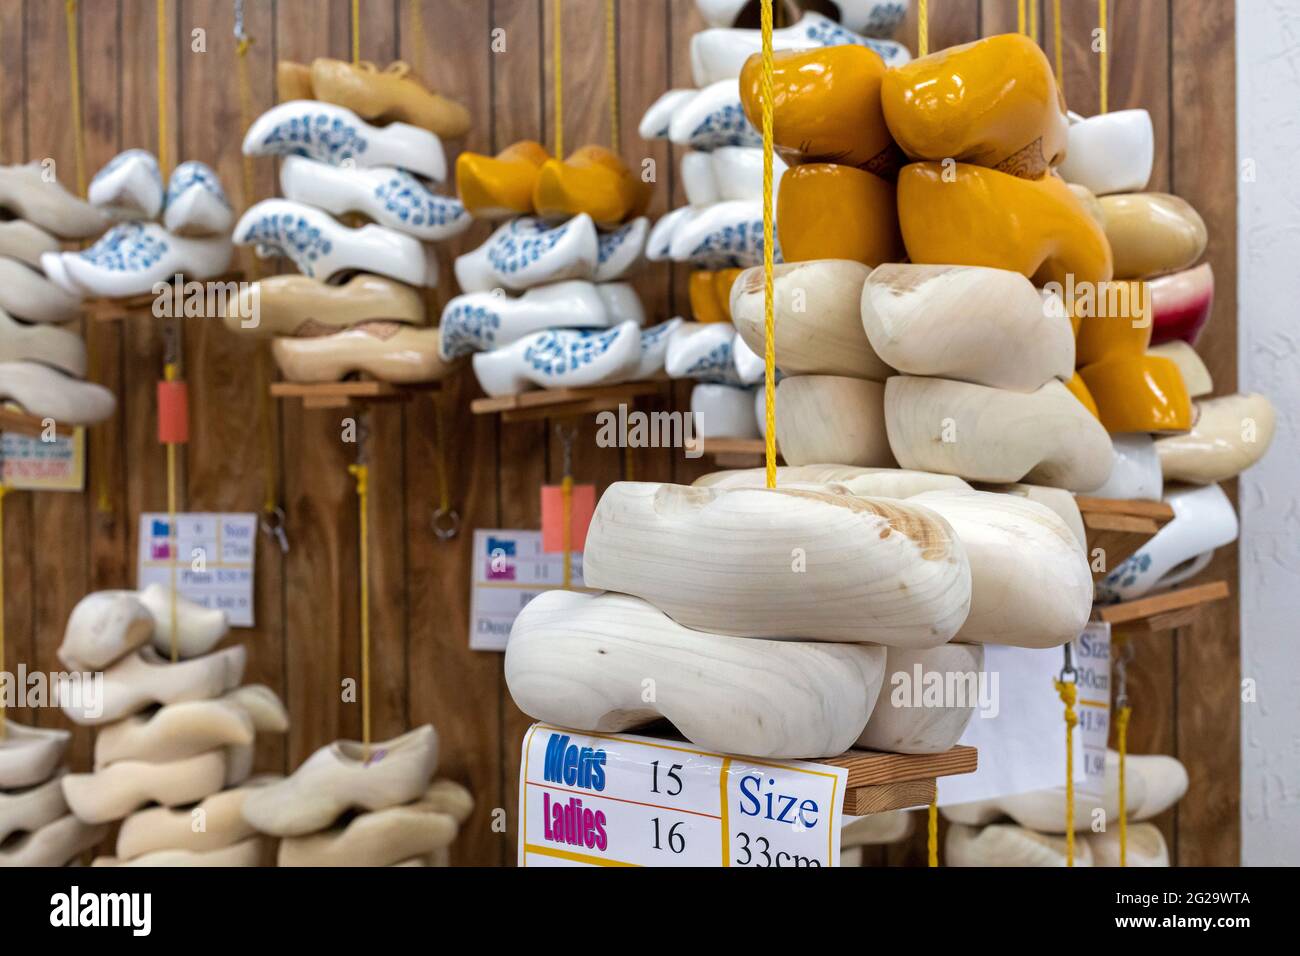 Holland, Michigan - Wooden shoes on sale at the De Klomp Wooden Shoe and Delft Factory, part of the Veldheer Tulip Farm. The city's Dutch heritage is Stock Photo